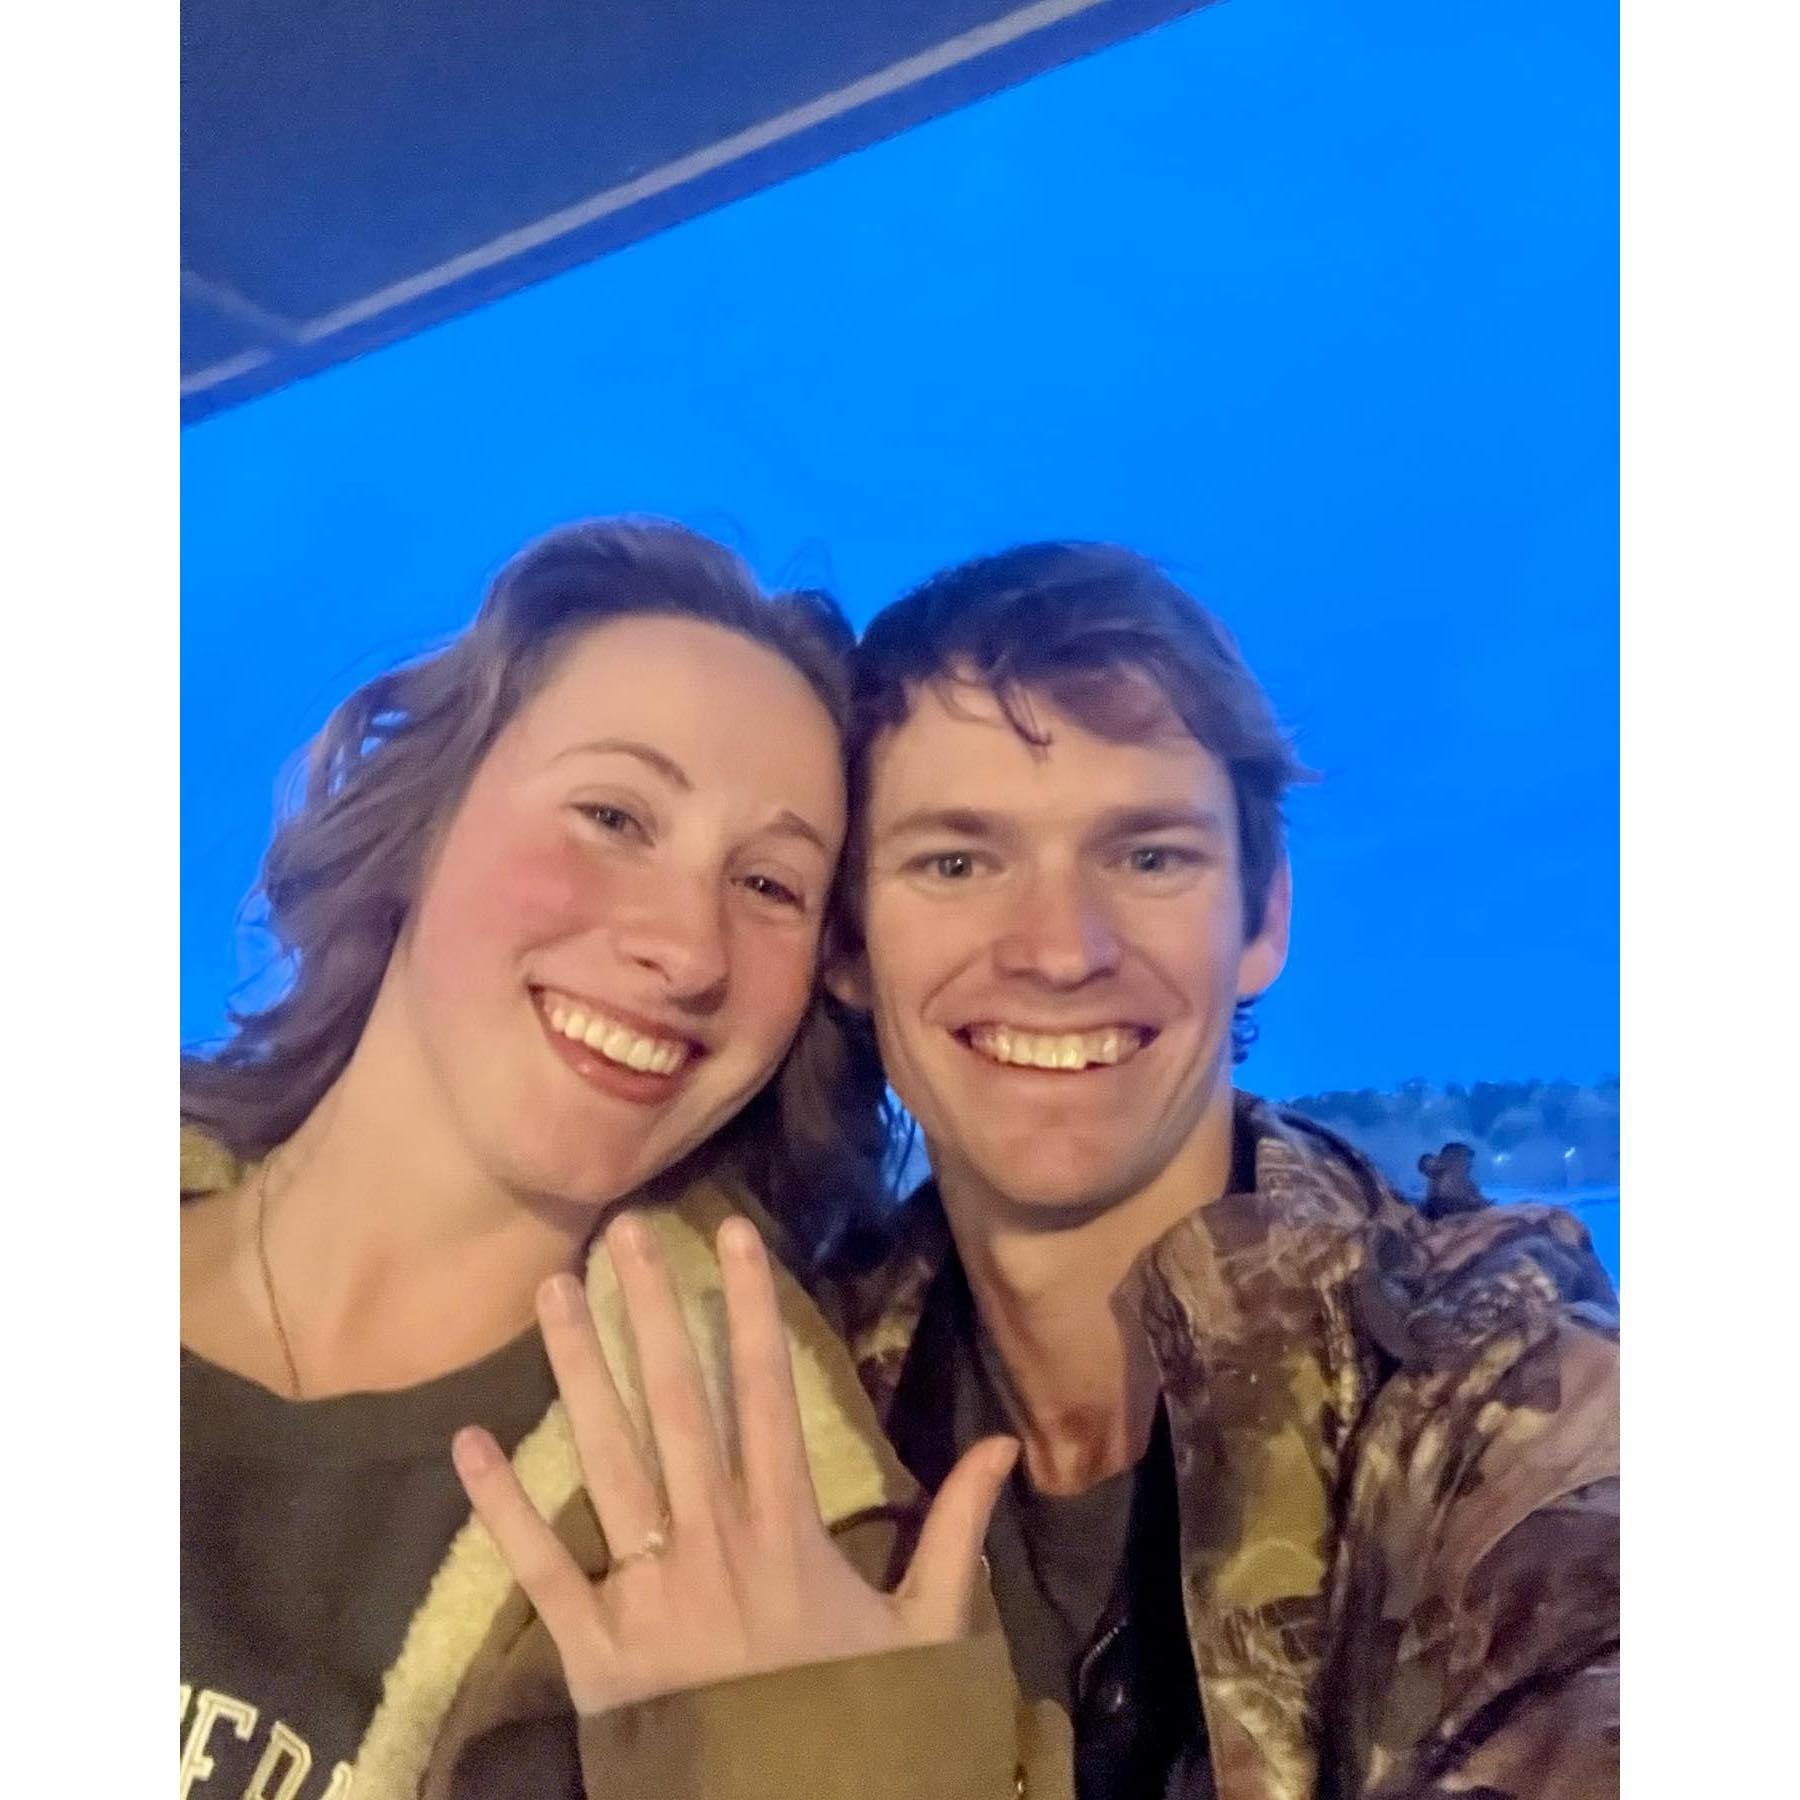 Right after he proposed! March 17th, 2023.